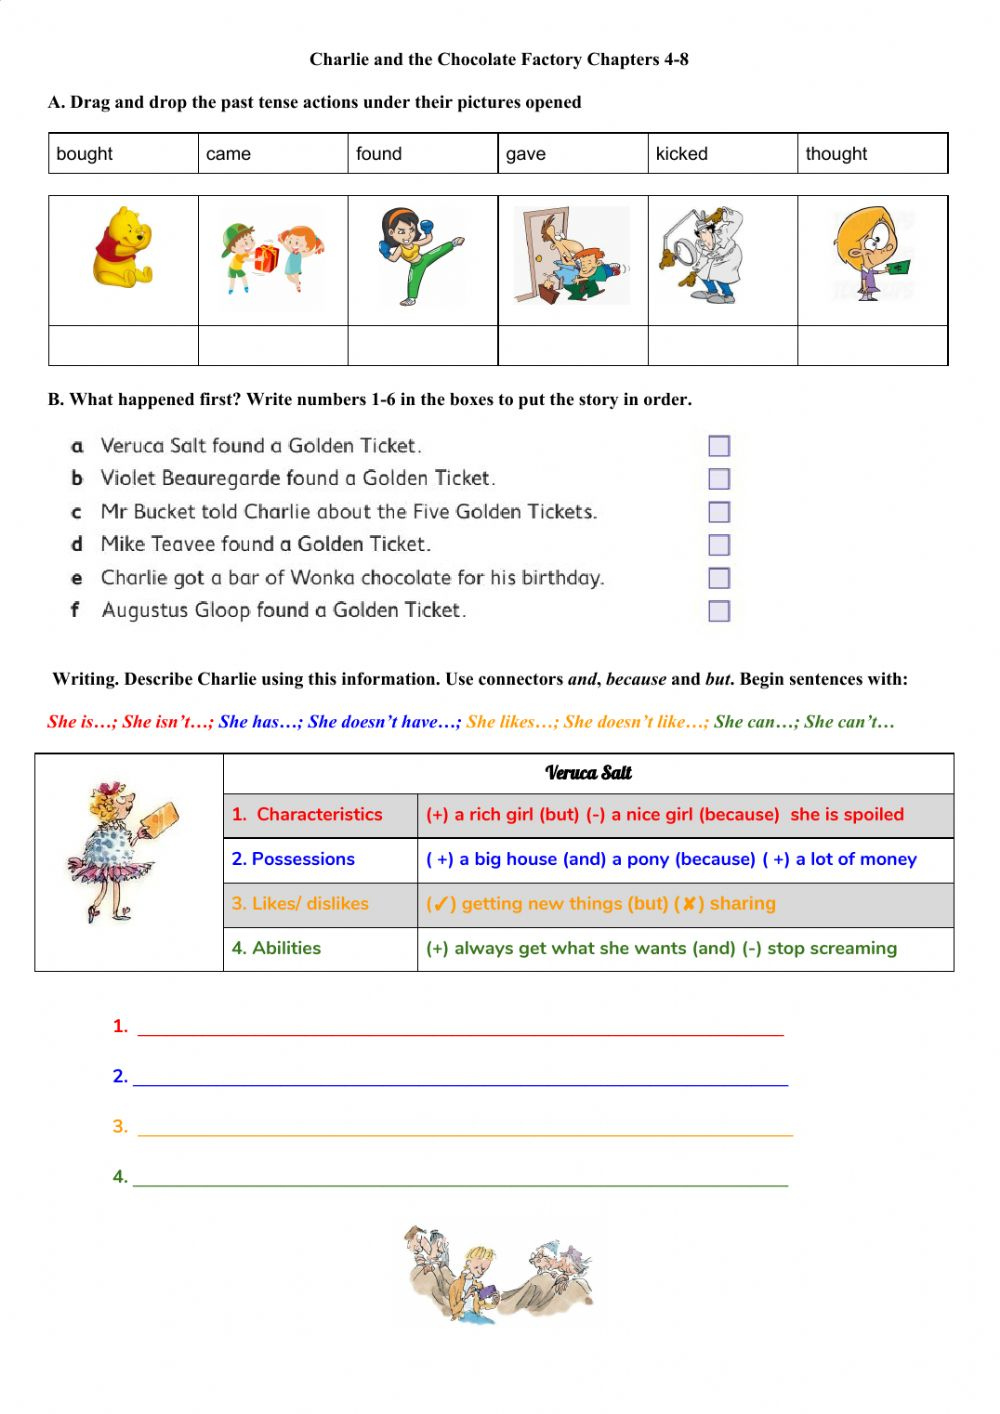 Reading Charlie And The Chocolate Factory Chapters 4 8 Worksheet